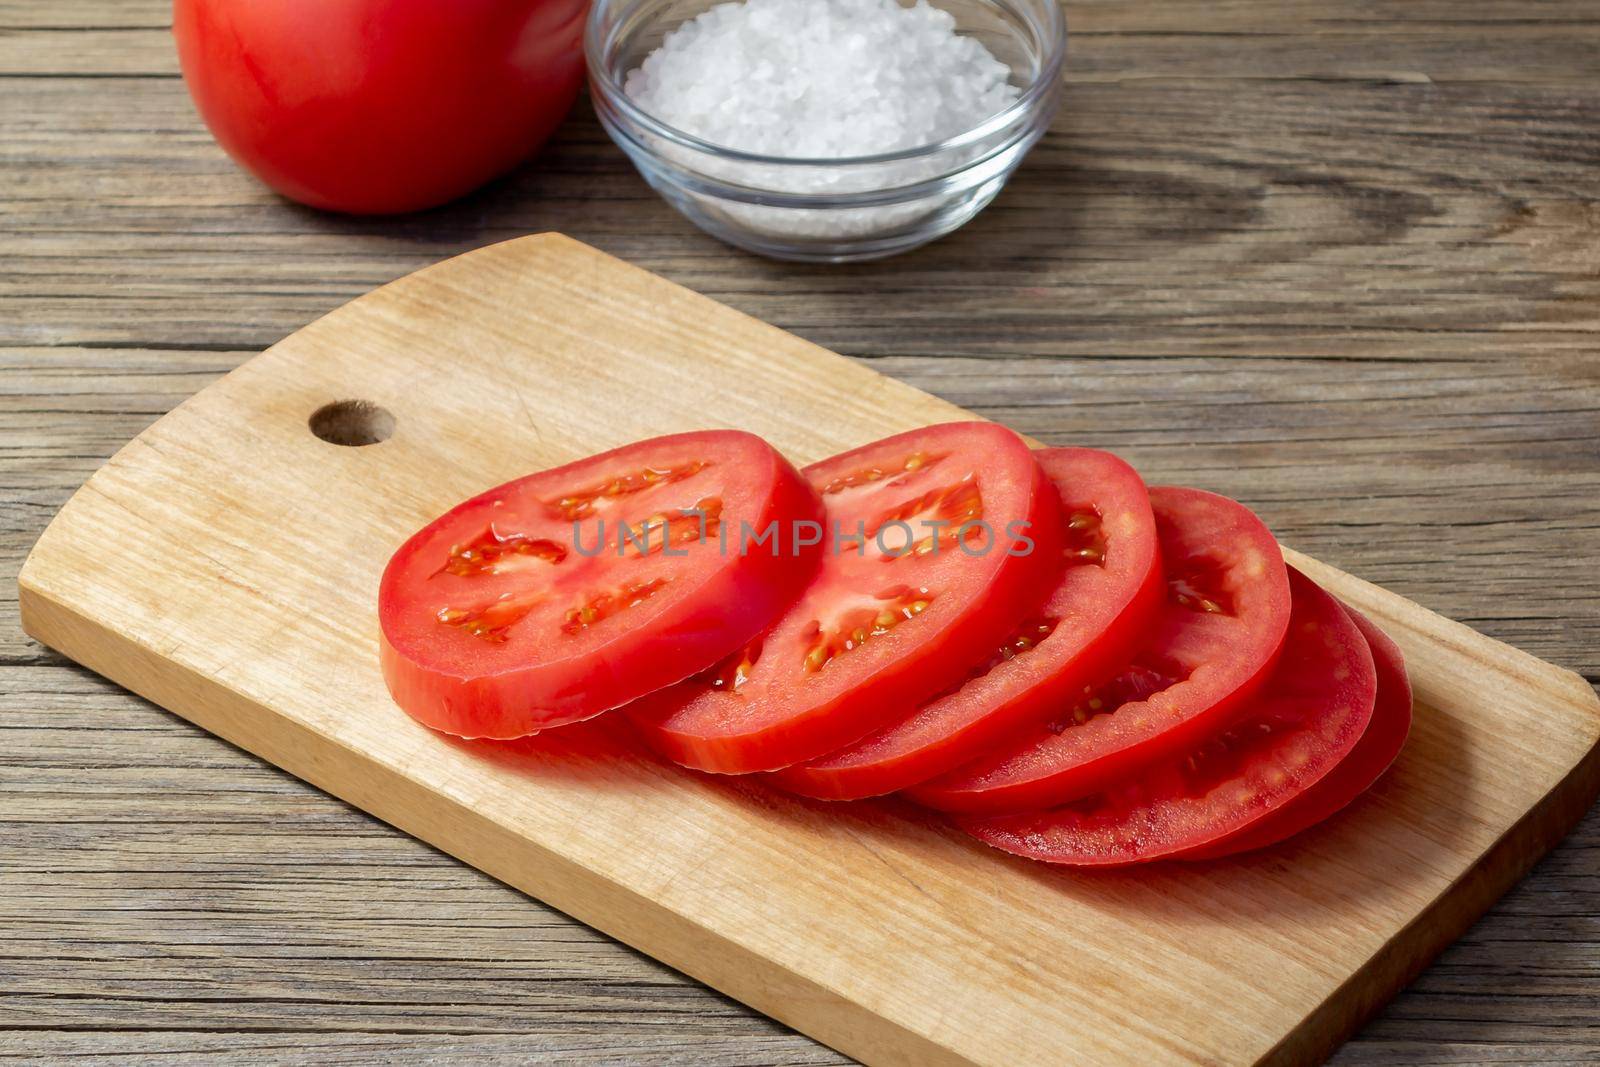 Tomato sliced into round slices on a wooden cutting board by galsand